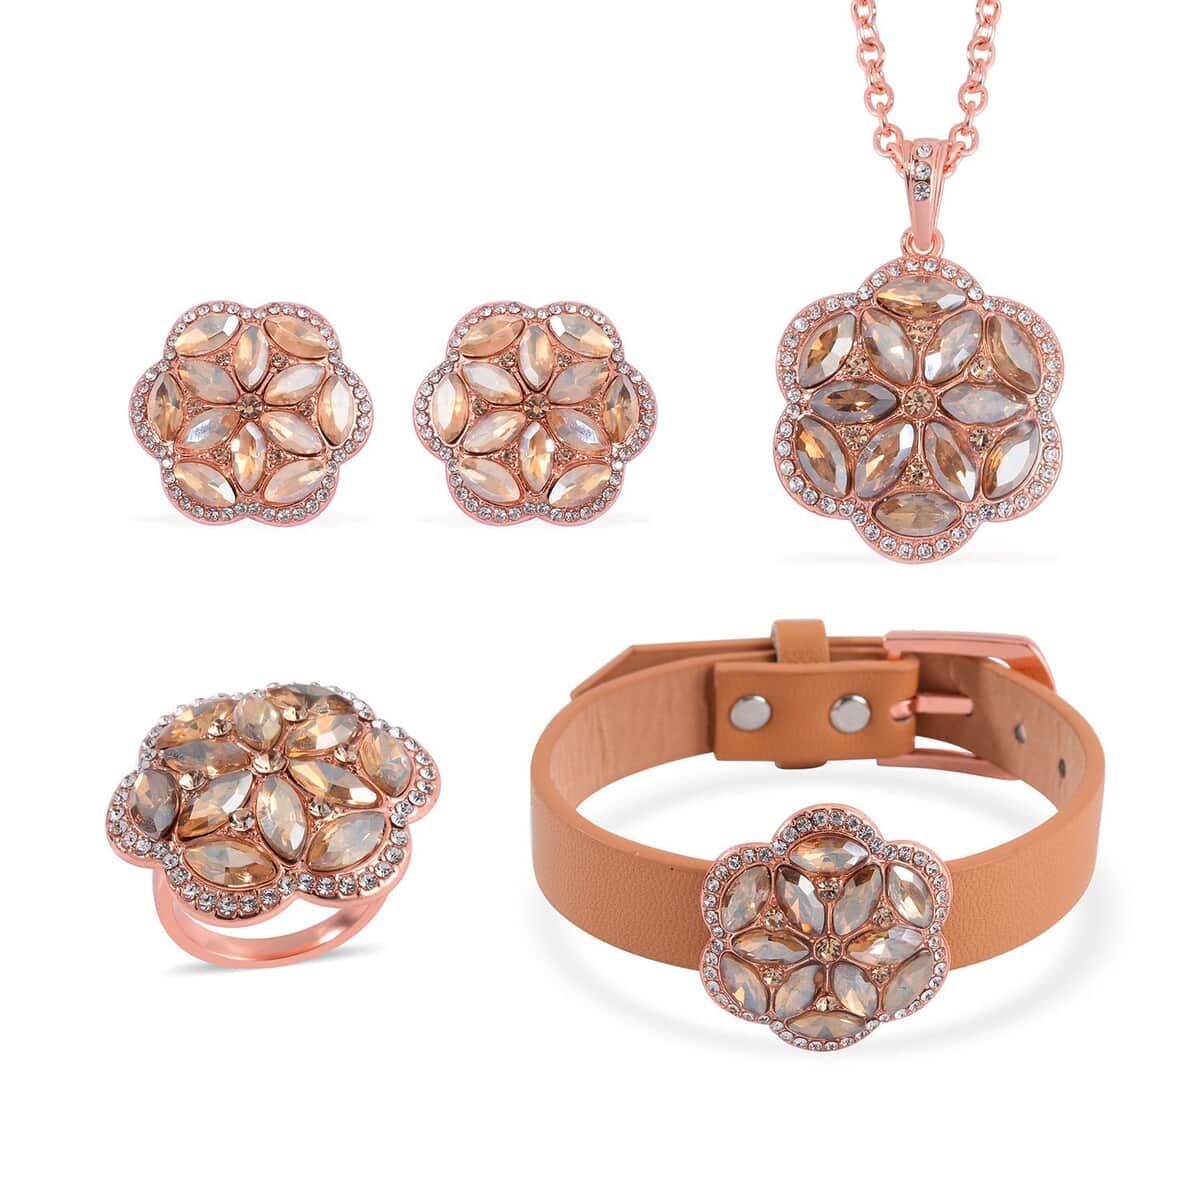 Peach and White Austrian Crystal, Faux Leather Floral Bracelet (6-8In), Earrings, Ring (Size 7.0) and Pendant Necklace 20-22 Inches In Rosetone image number 0